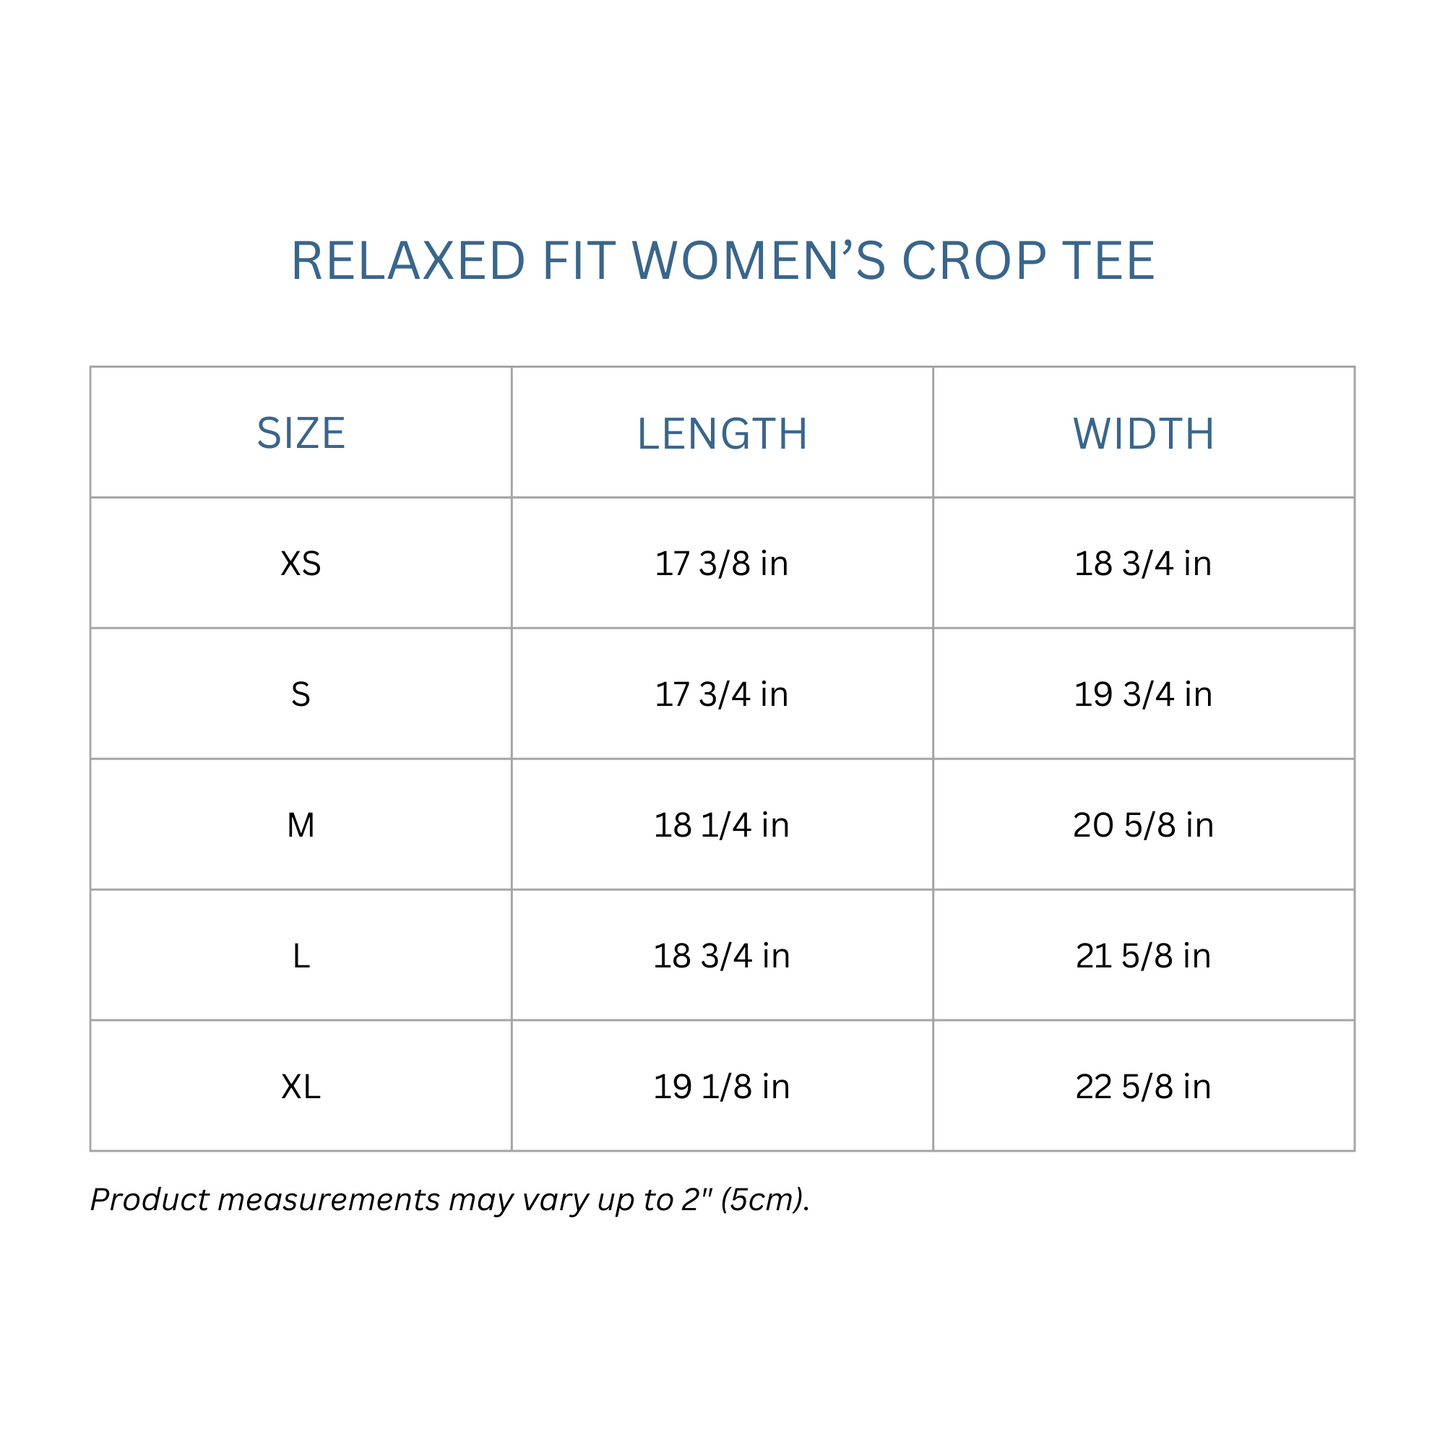 Totes Manila size guide for women's crop tee